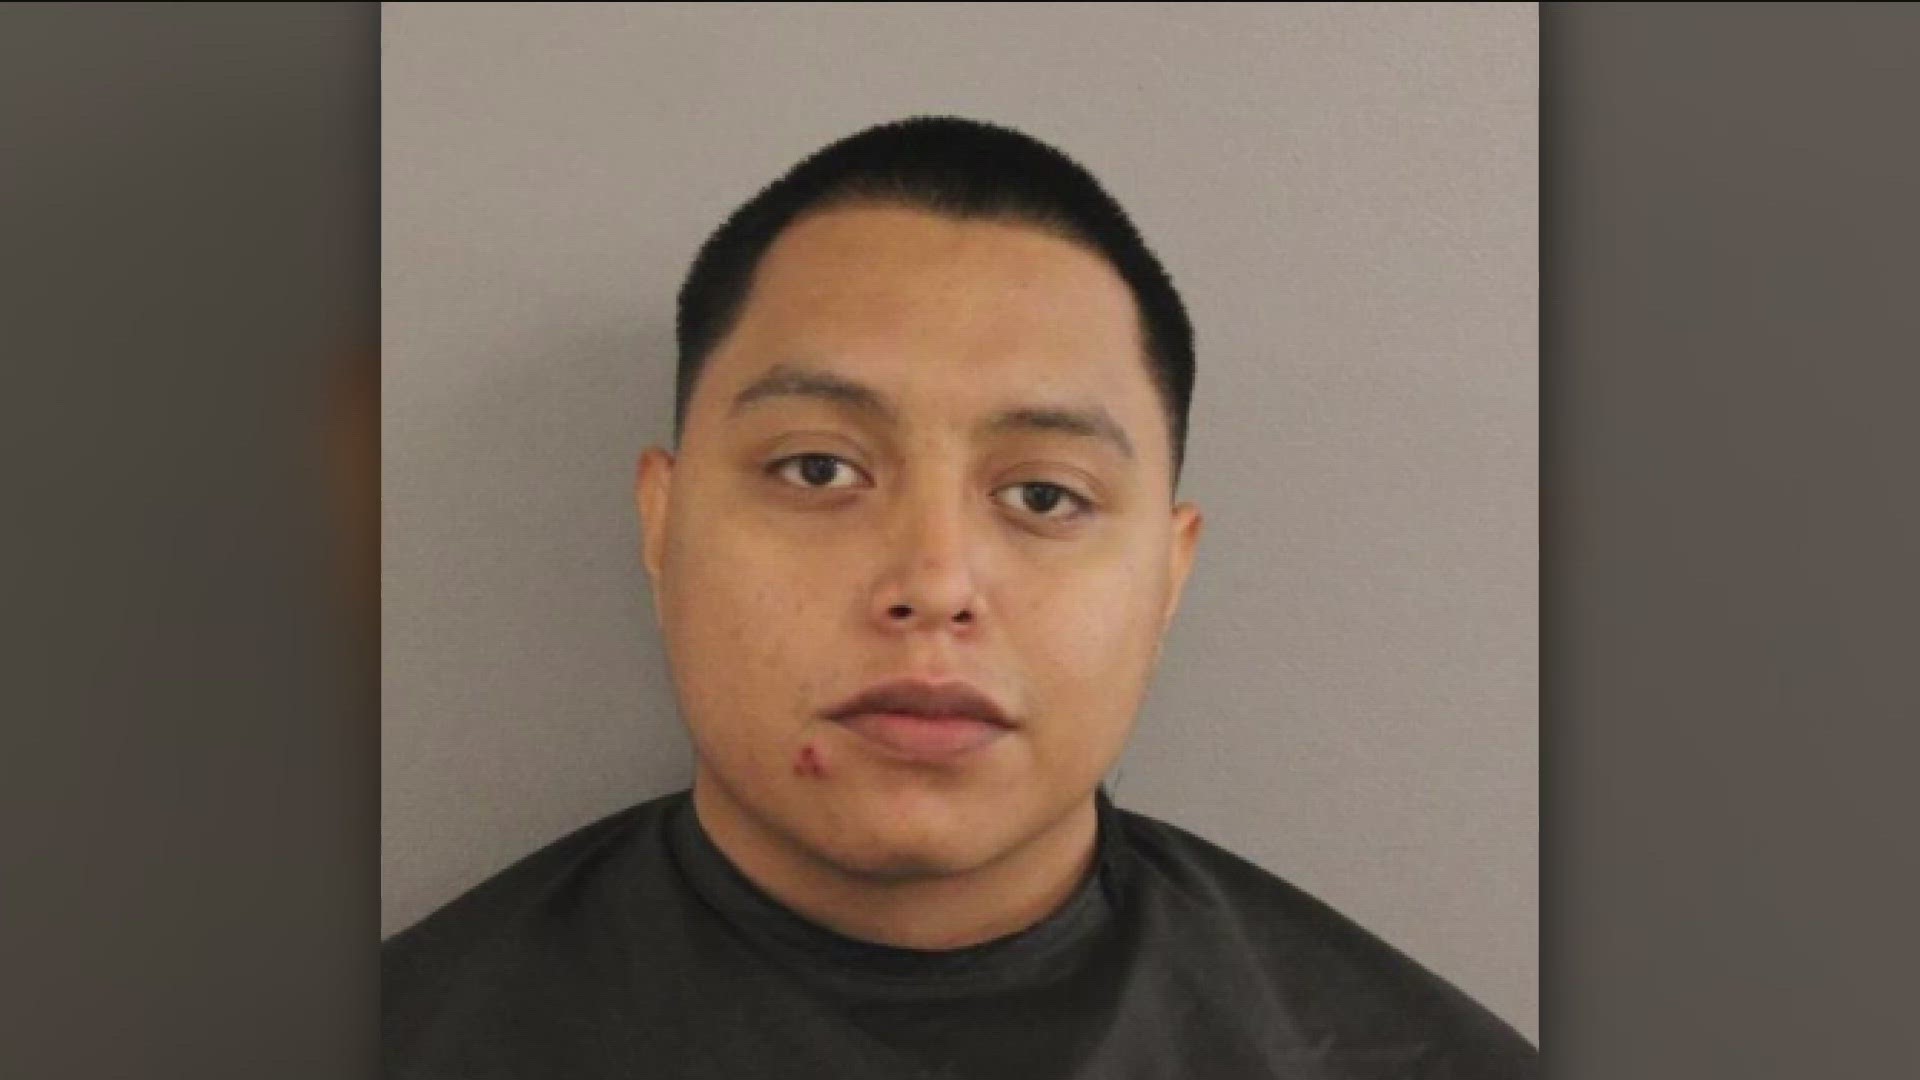 Elgin police said the actions of Pedro Rodriguez were intentional and reckless when he shot at four young women in the parking lot of an H-E-B in Elgin.